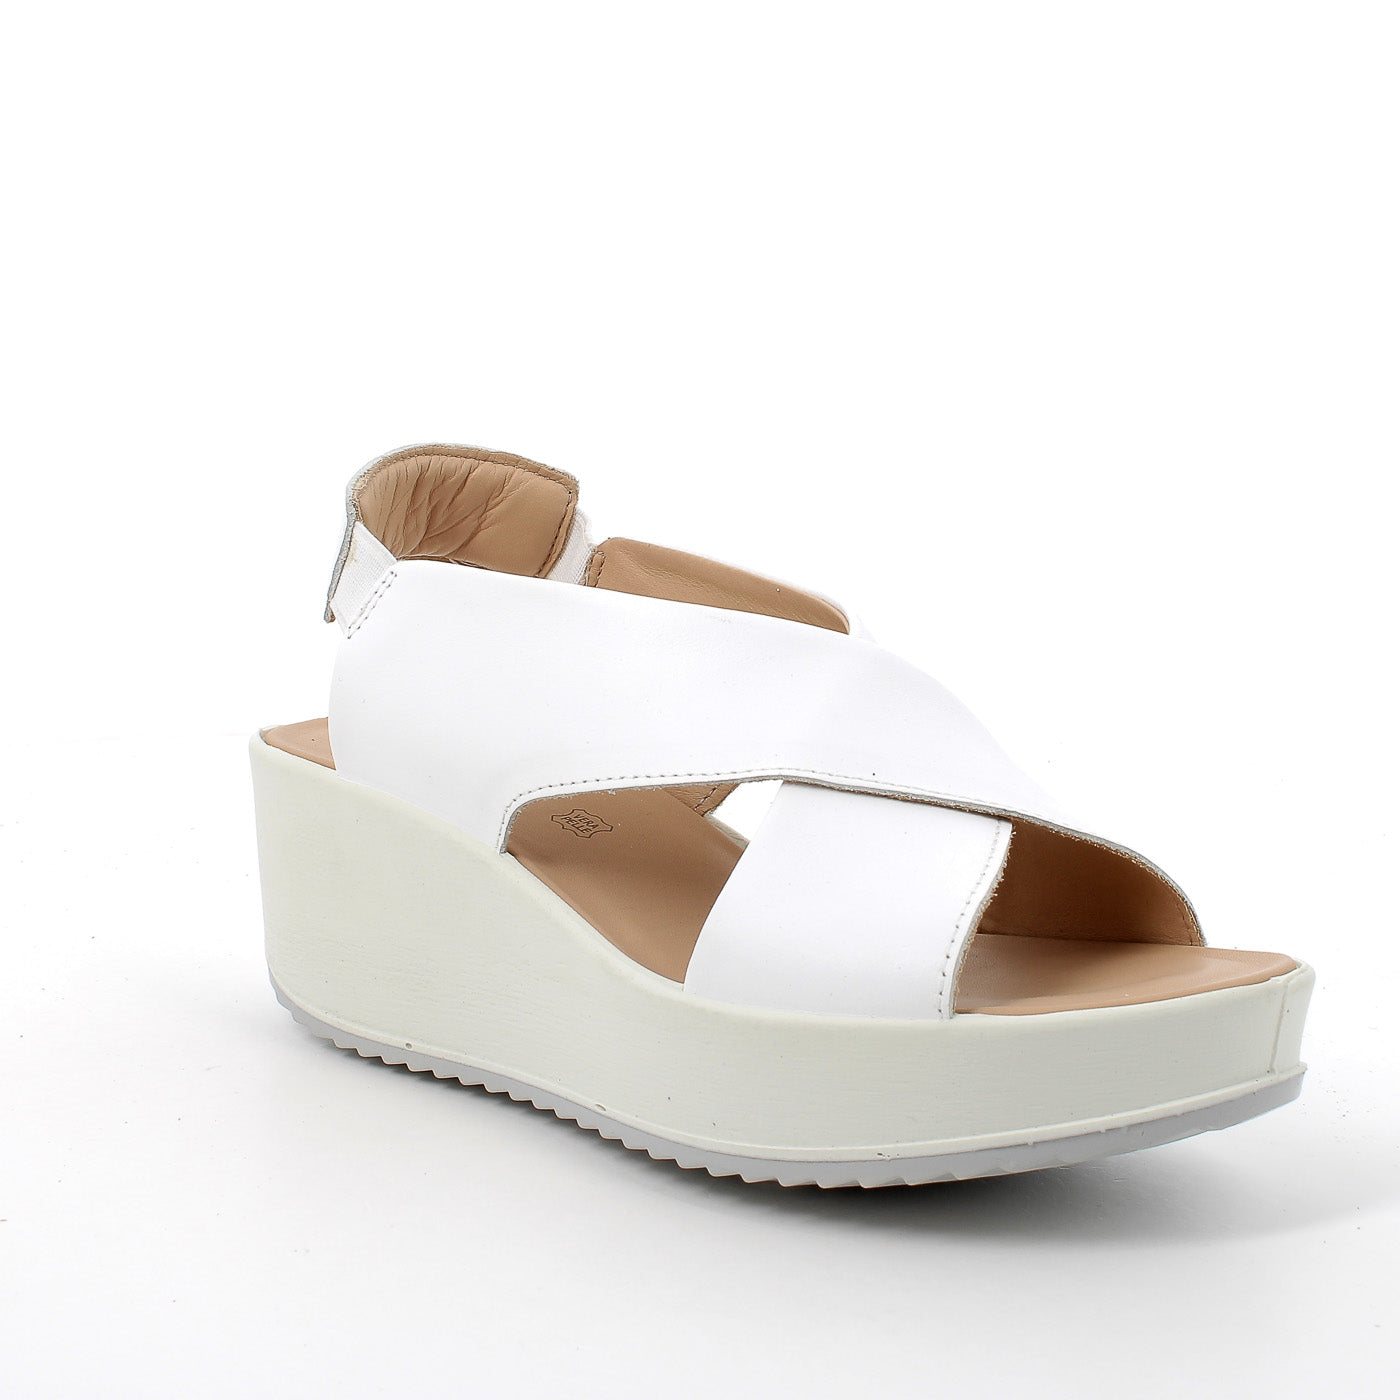 IGI & Co White Summer Wedge Sandals with Crossover Straps